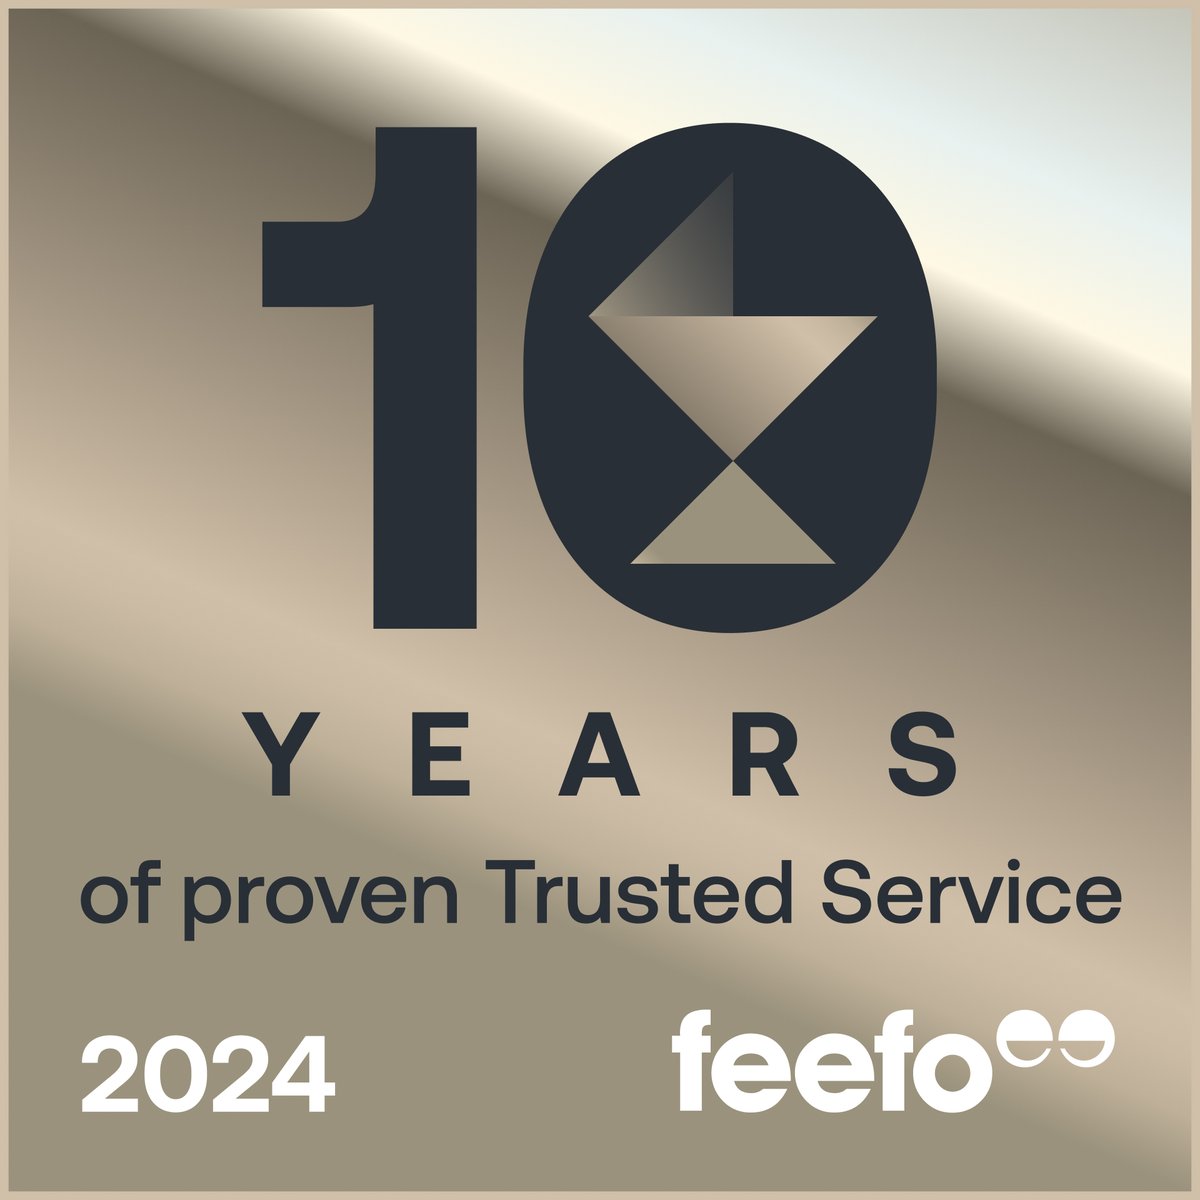 📢 New award announcement 🥇Earlier this year we shared the news that we'd won #Feefo's Gold Trusted Service Award. We can now reveal that we have also won their new 10 Years of Excellence Award, recognising a decade of consistent service performance. #FeefoTrusted